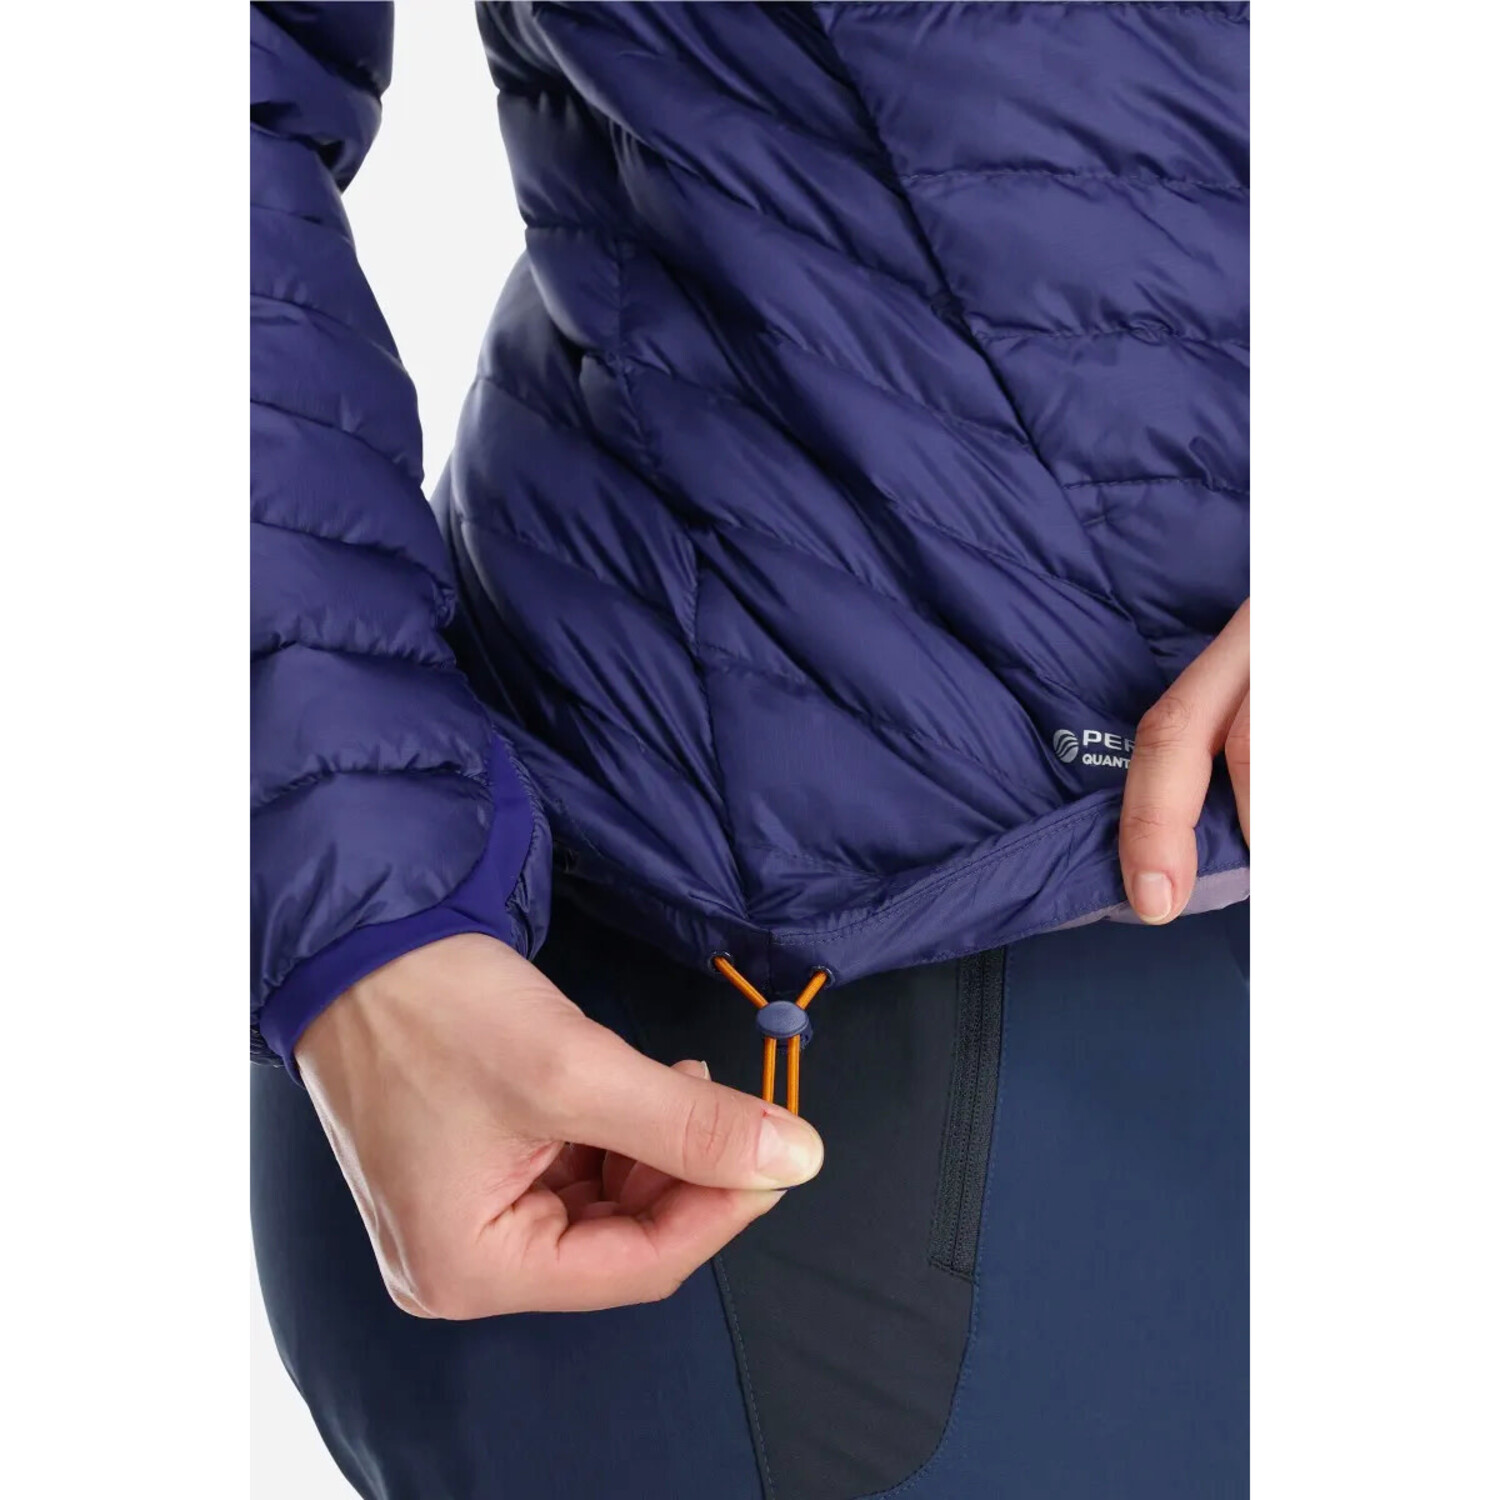 Rab Women's Cirrus Insulated Jacket - True Outdoors